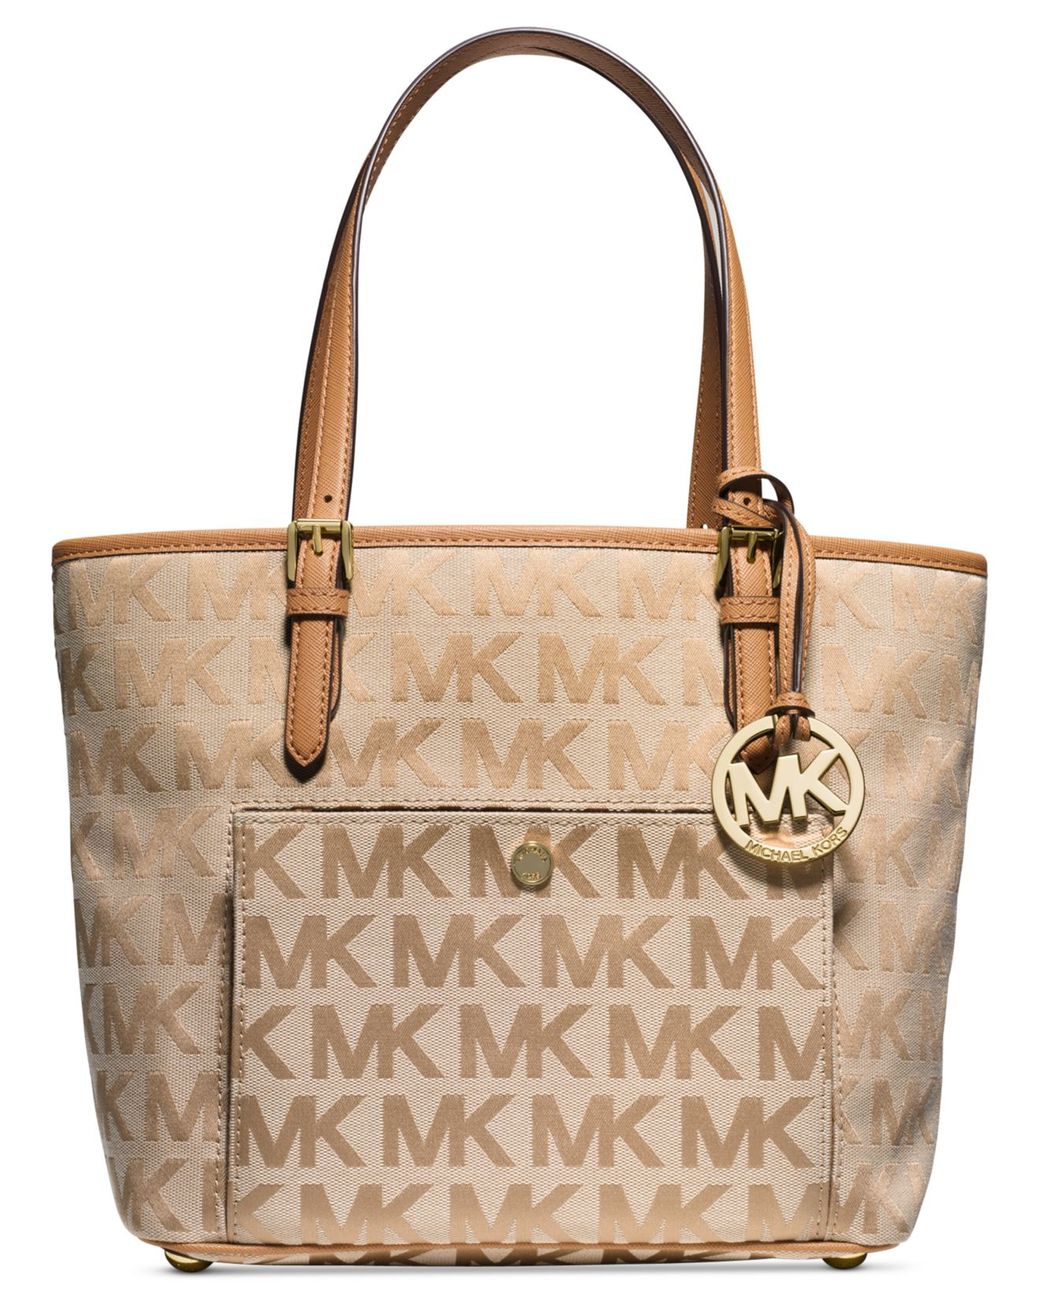 Michael Kors Large Saffiano Leather Snap Pocket Tote